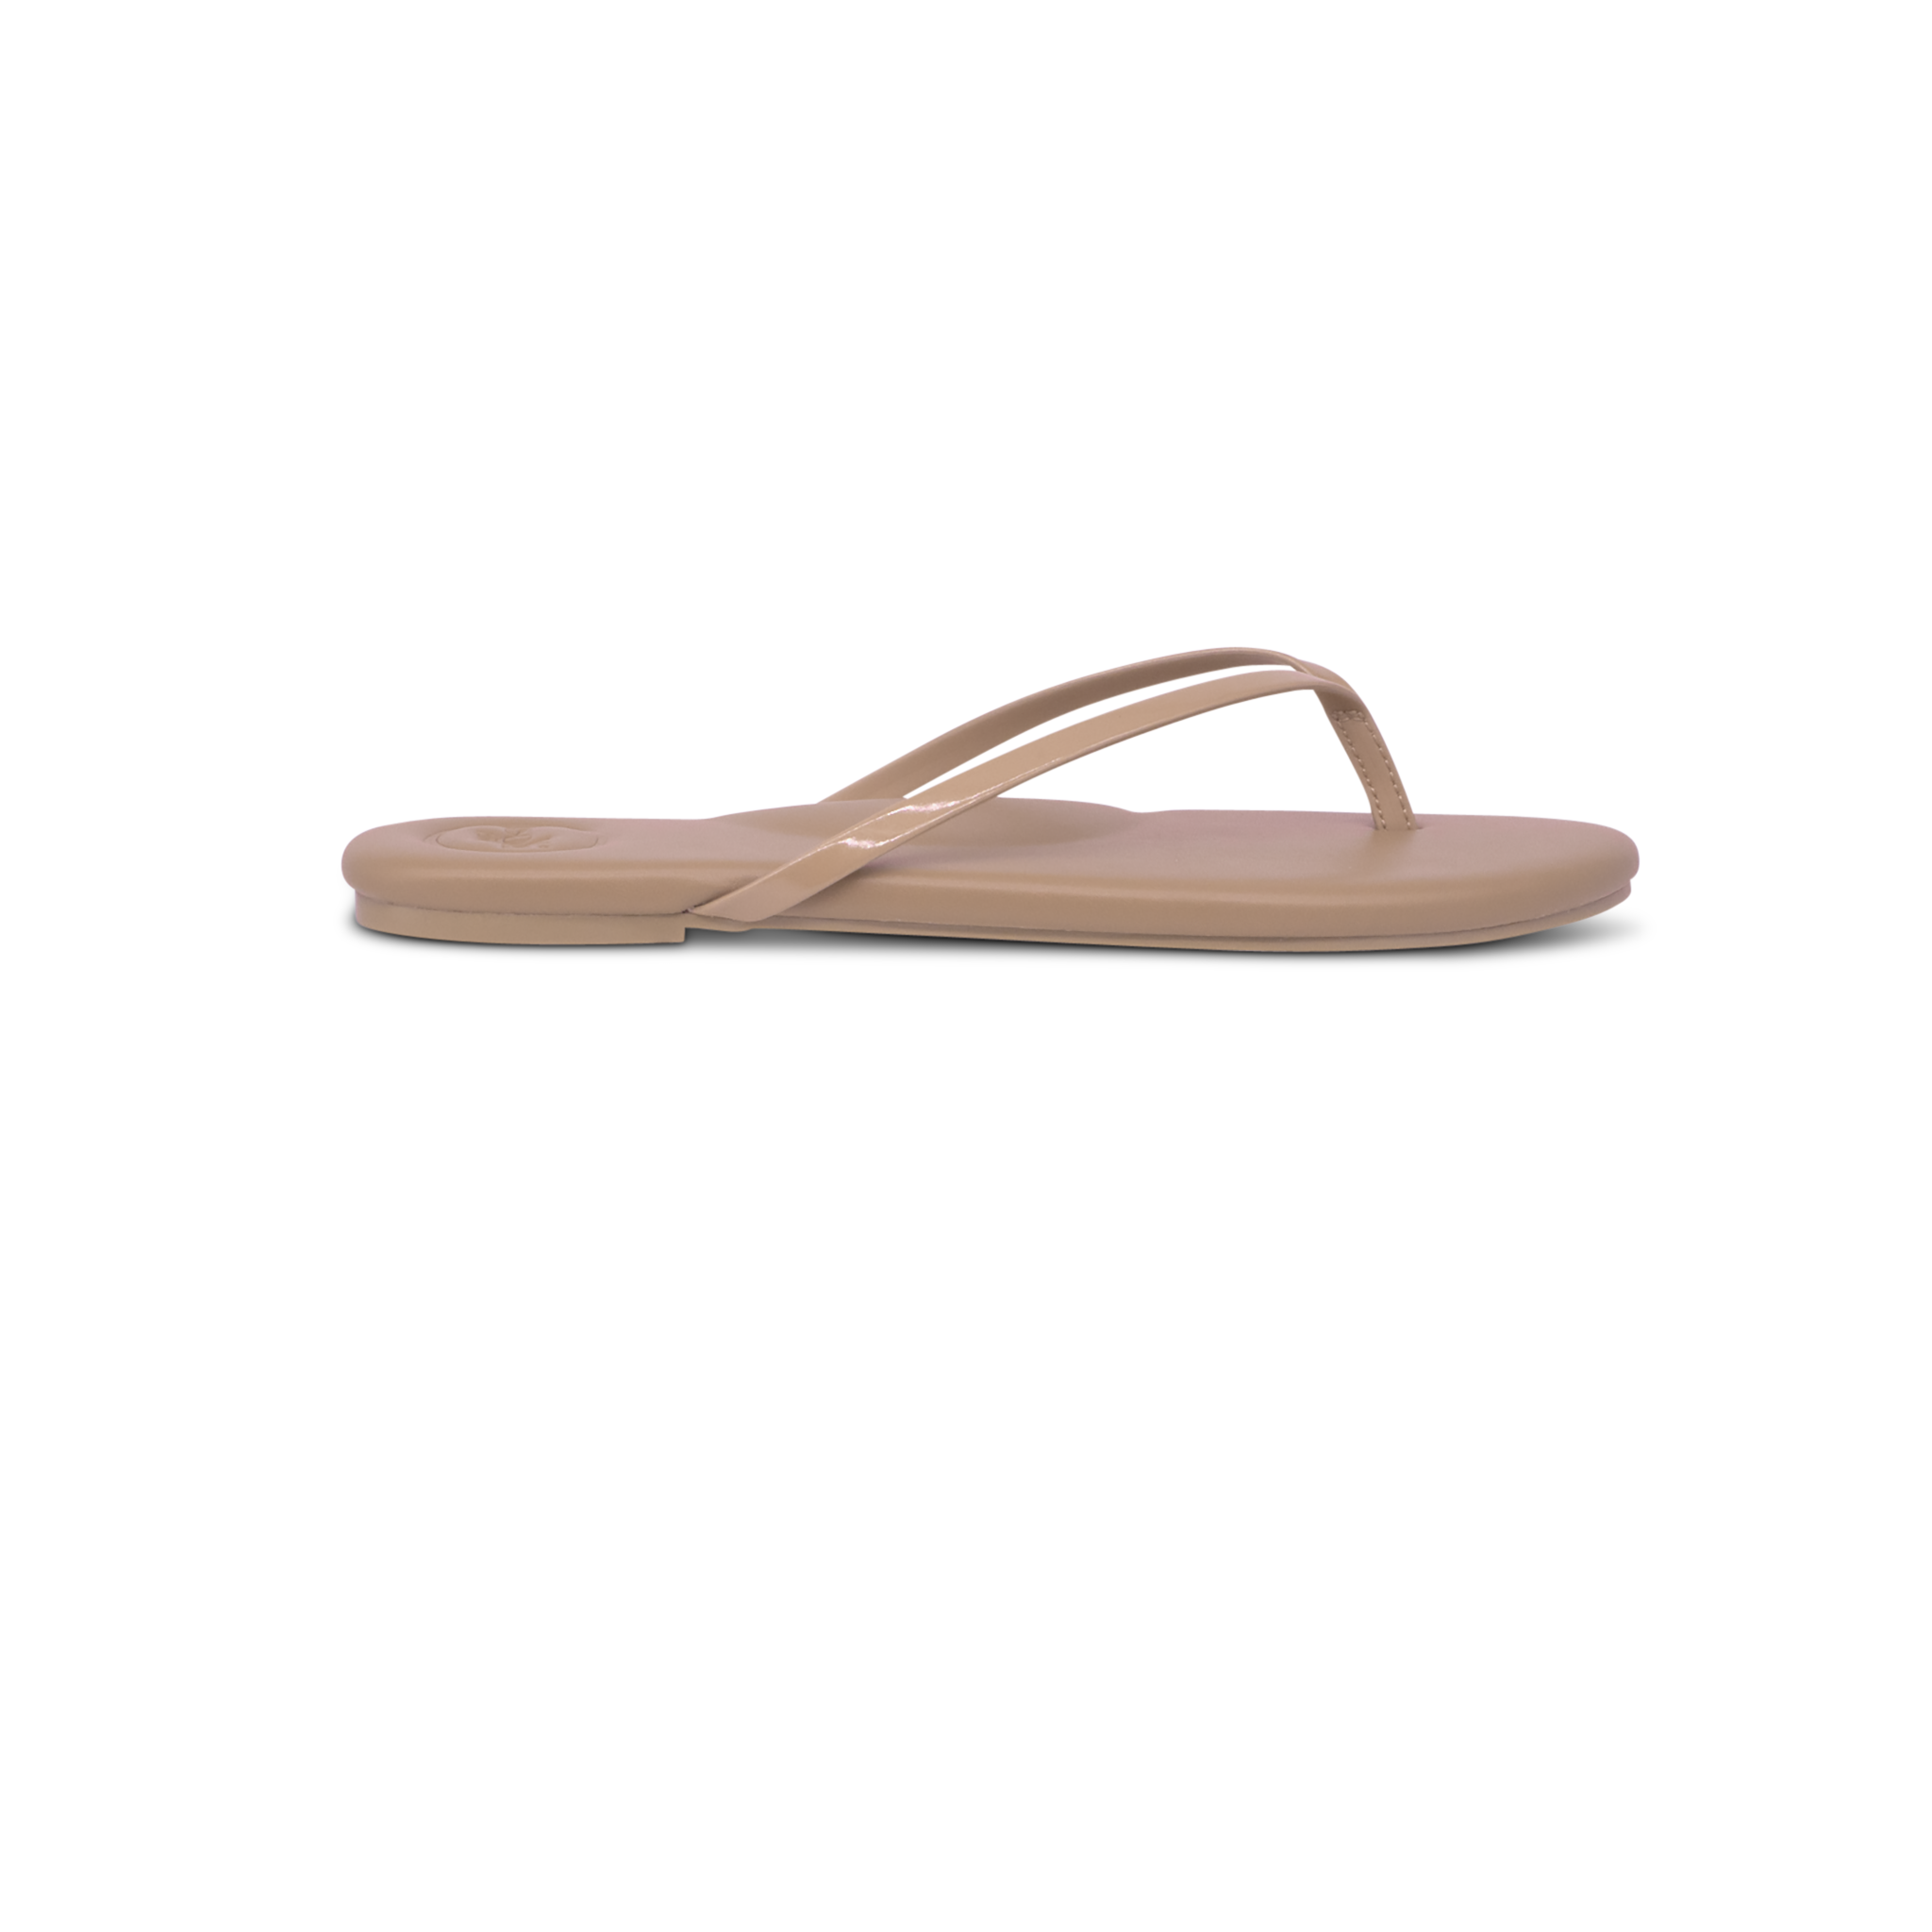 Indie Nude with Patent Nude Strap Sandal